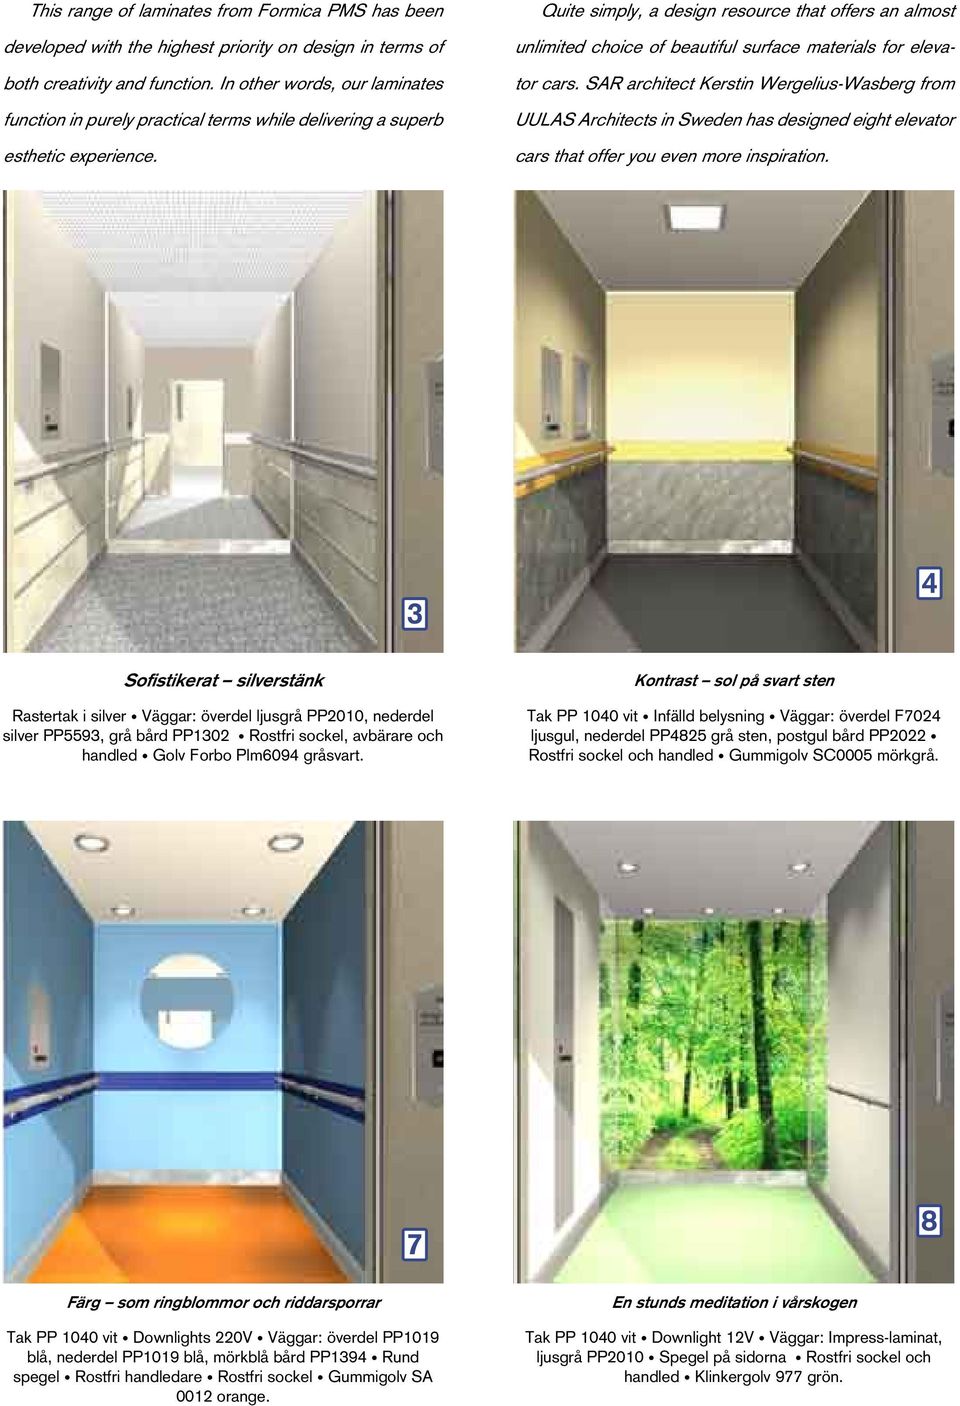 Quite simply, a design resource that offers an almost unlimited choice of beautiful surface materials for elevator cars.